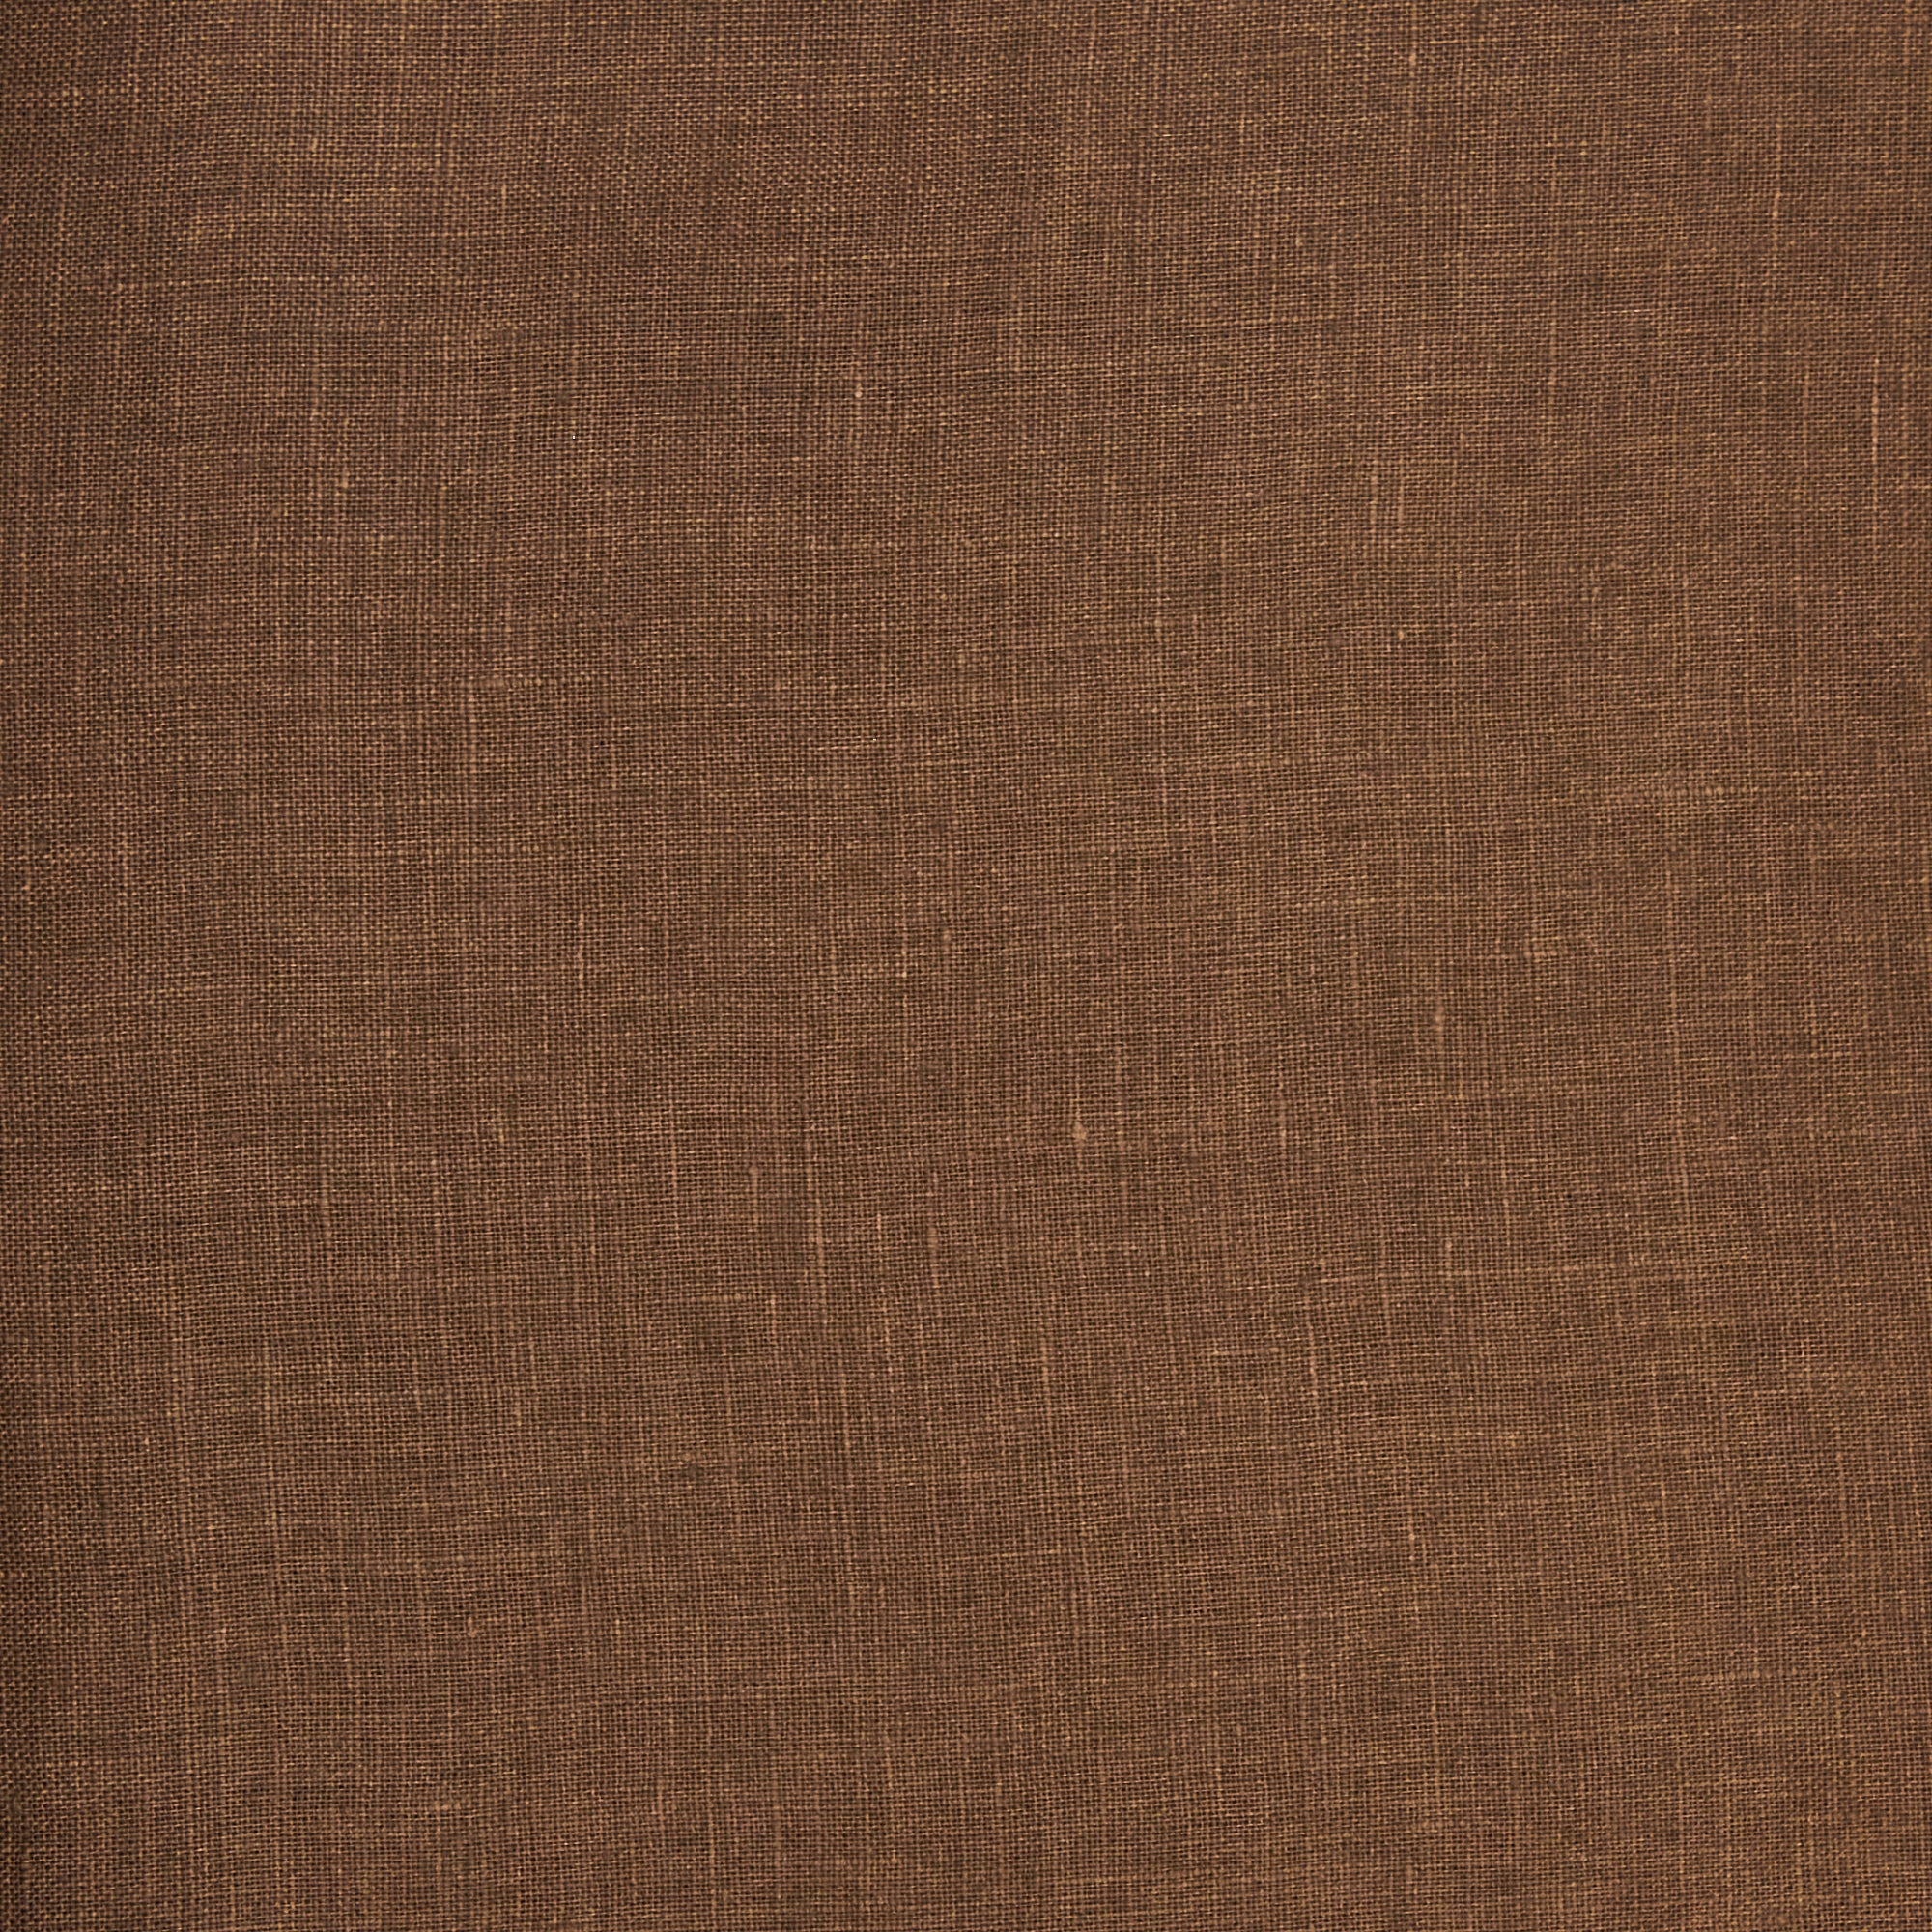 Light Brown Texture Fabric, On Sale